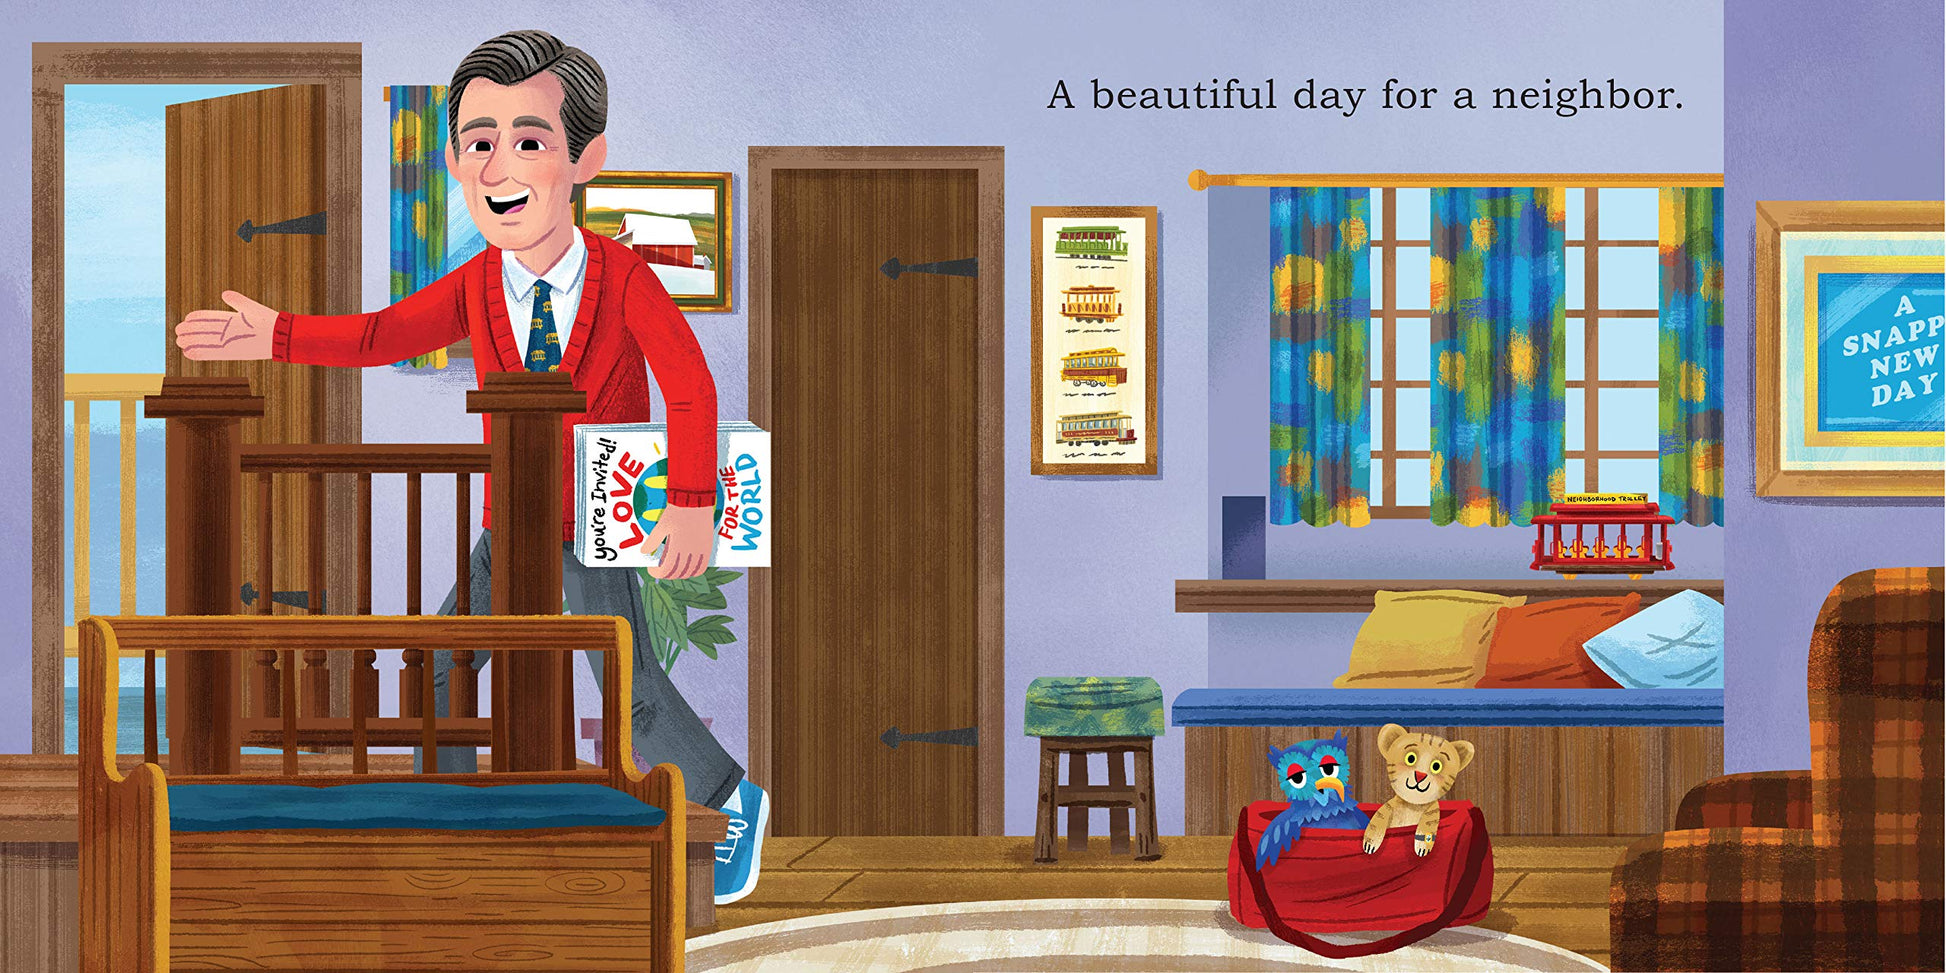 next set of pages has illustration of mr. rodgers inside his home and text